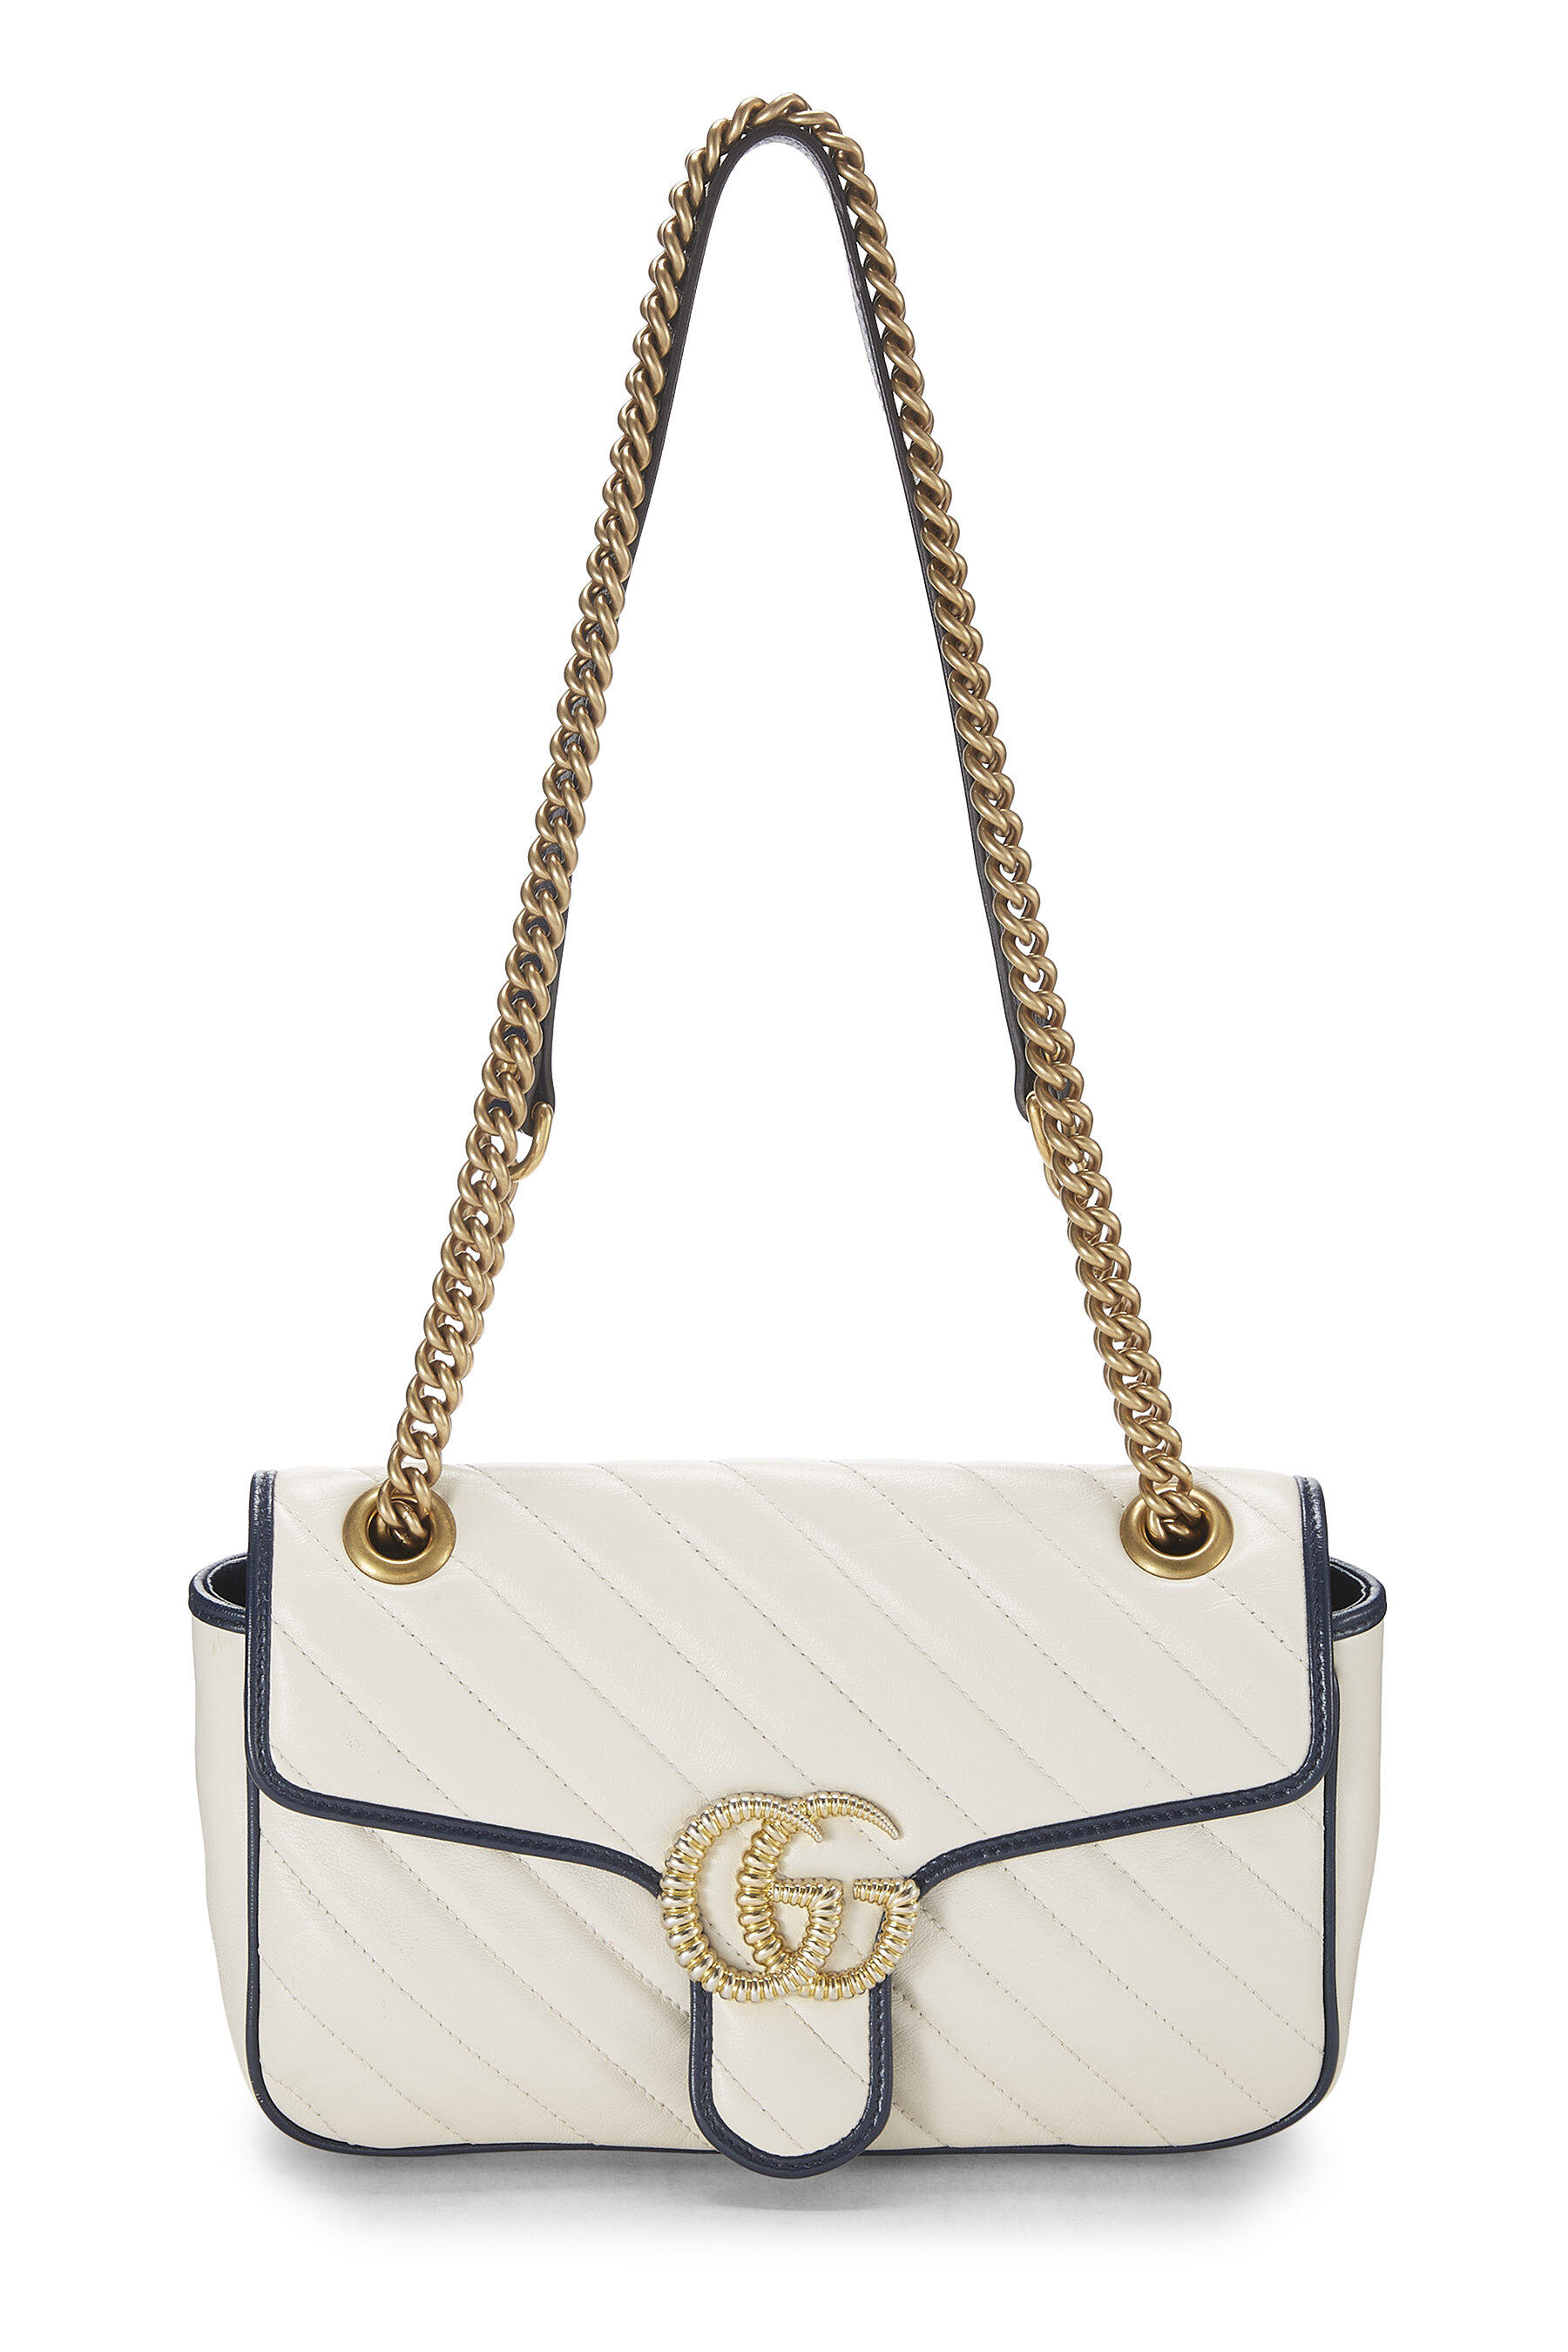 Gucci White Leather Torchon GG Marmont Shoulder Bag Small